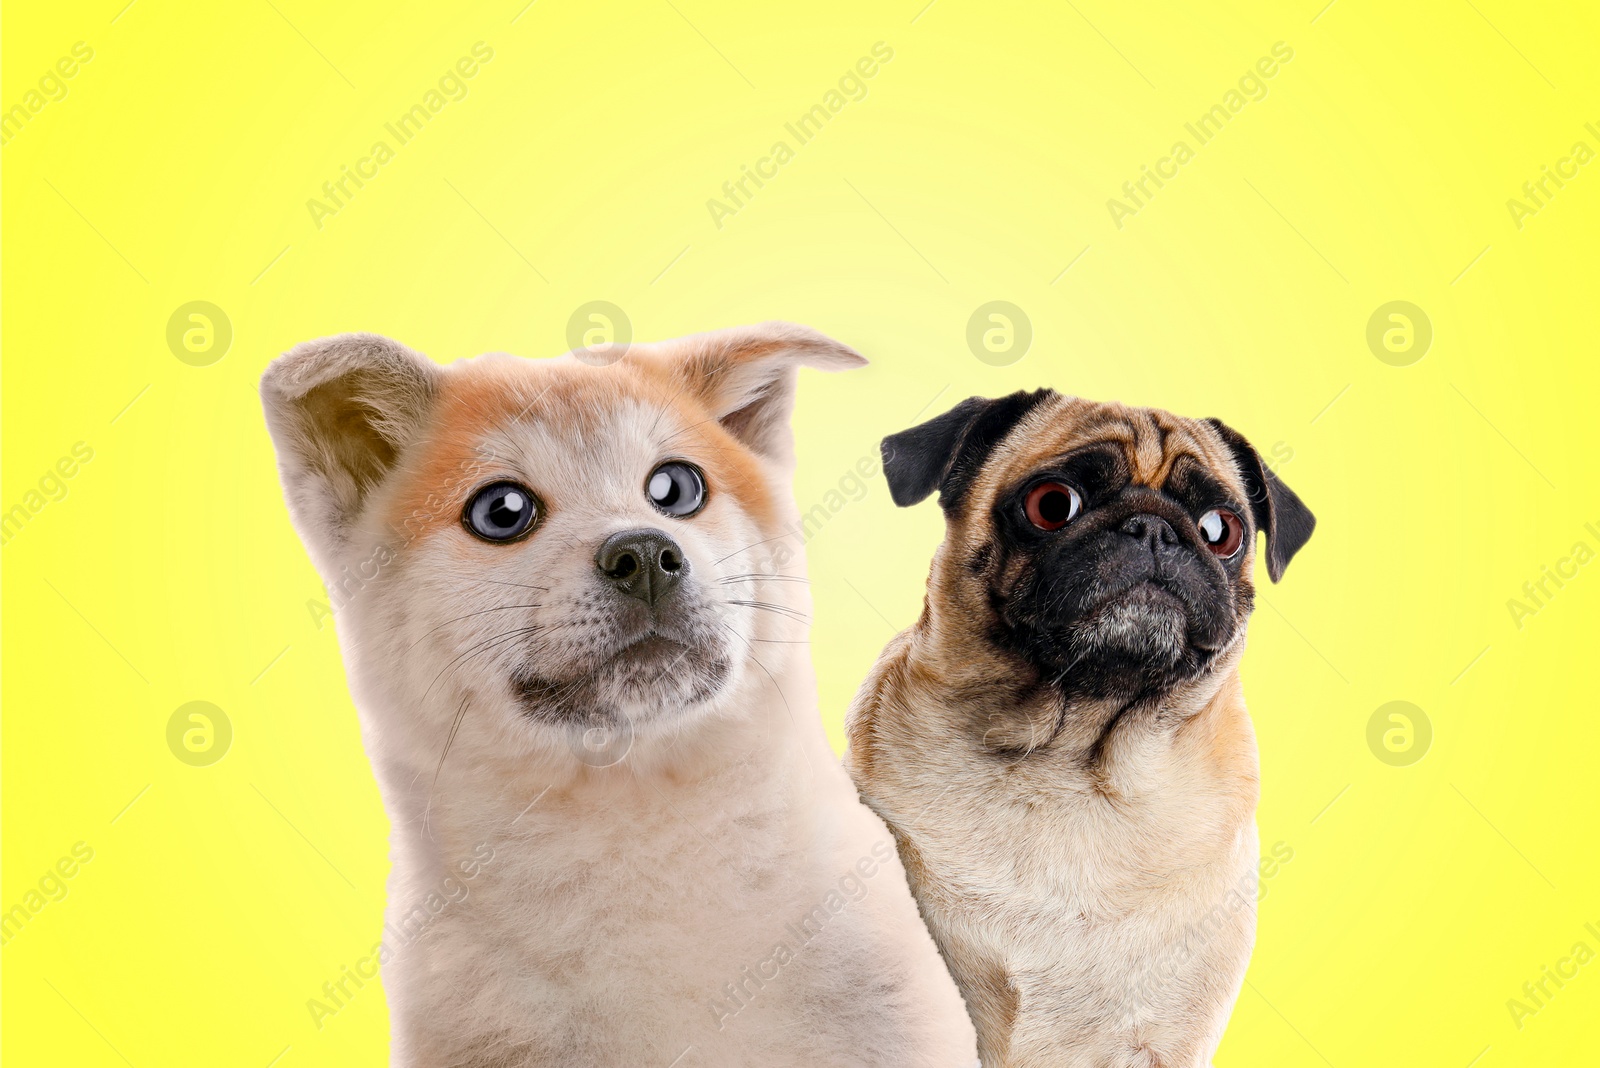 Image of Cute surprised animals on yellow background. Pug dog and Akita Inu puppy with big eyes